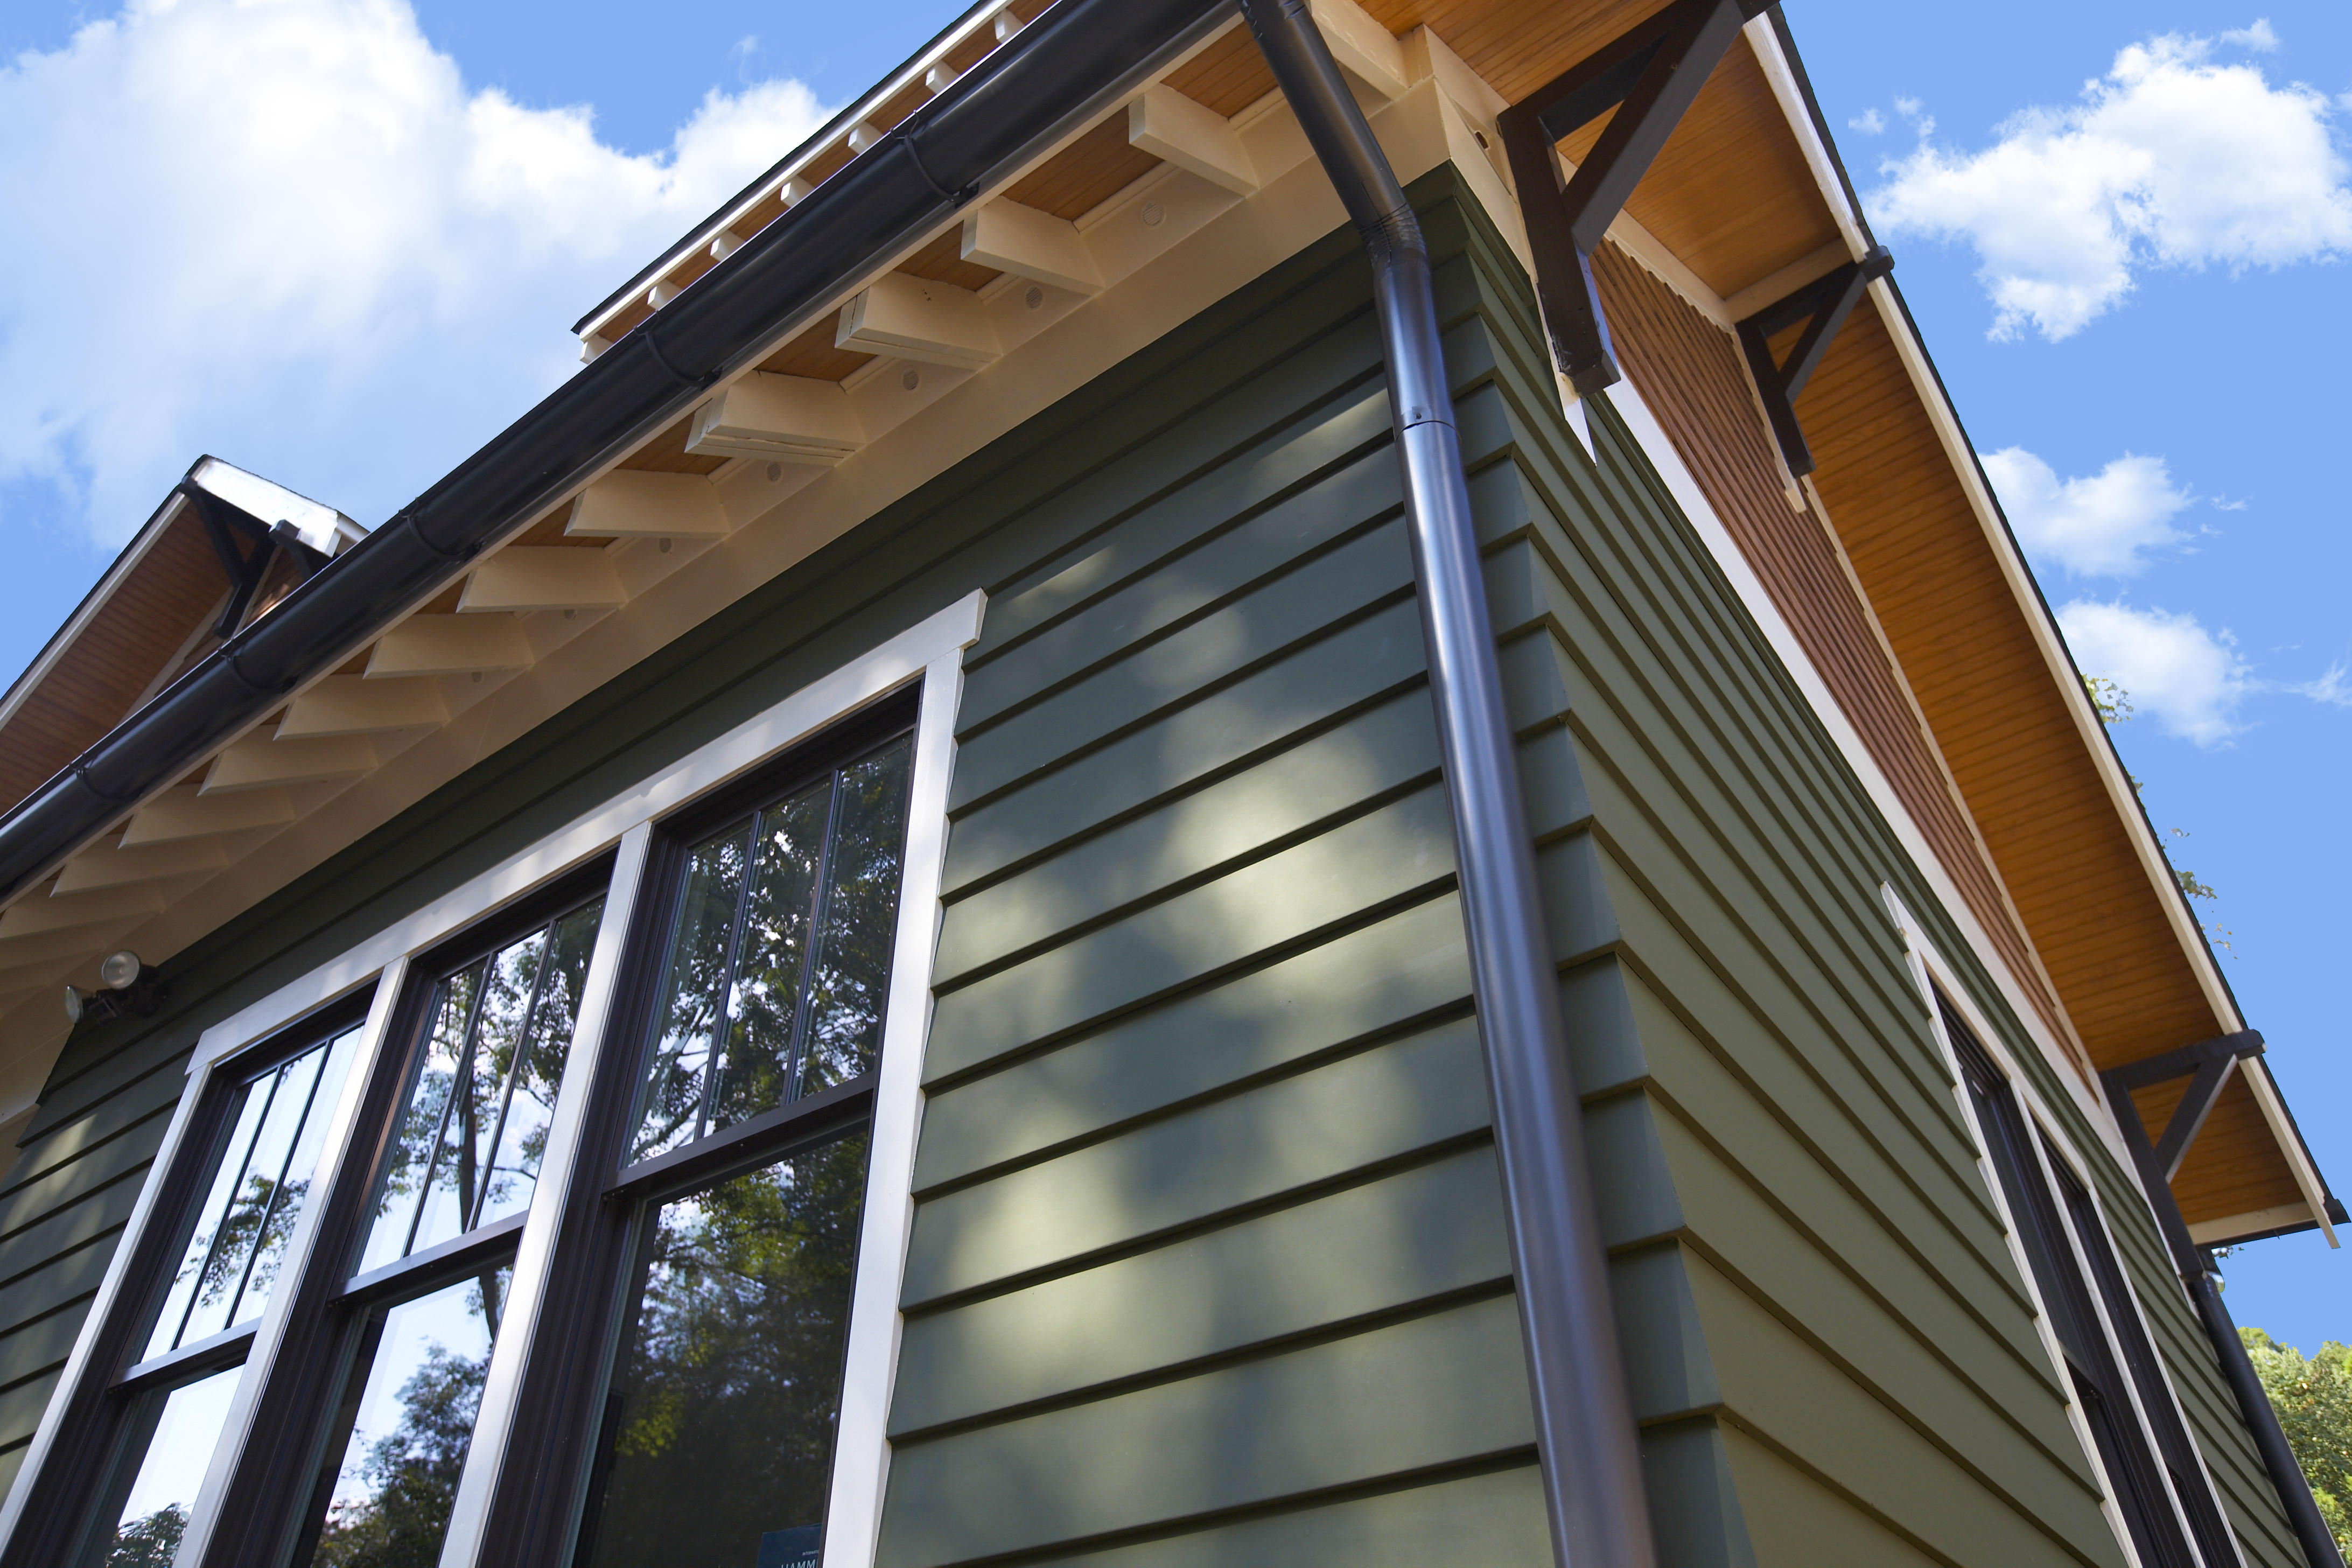 Replacement Siding